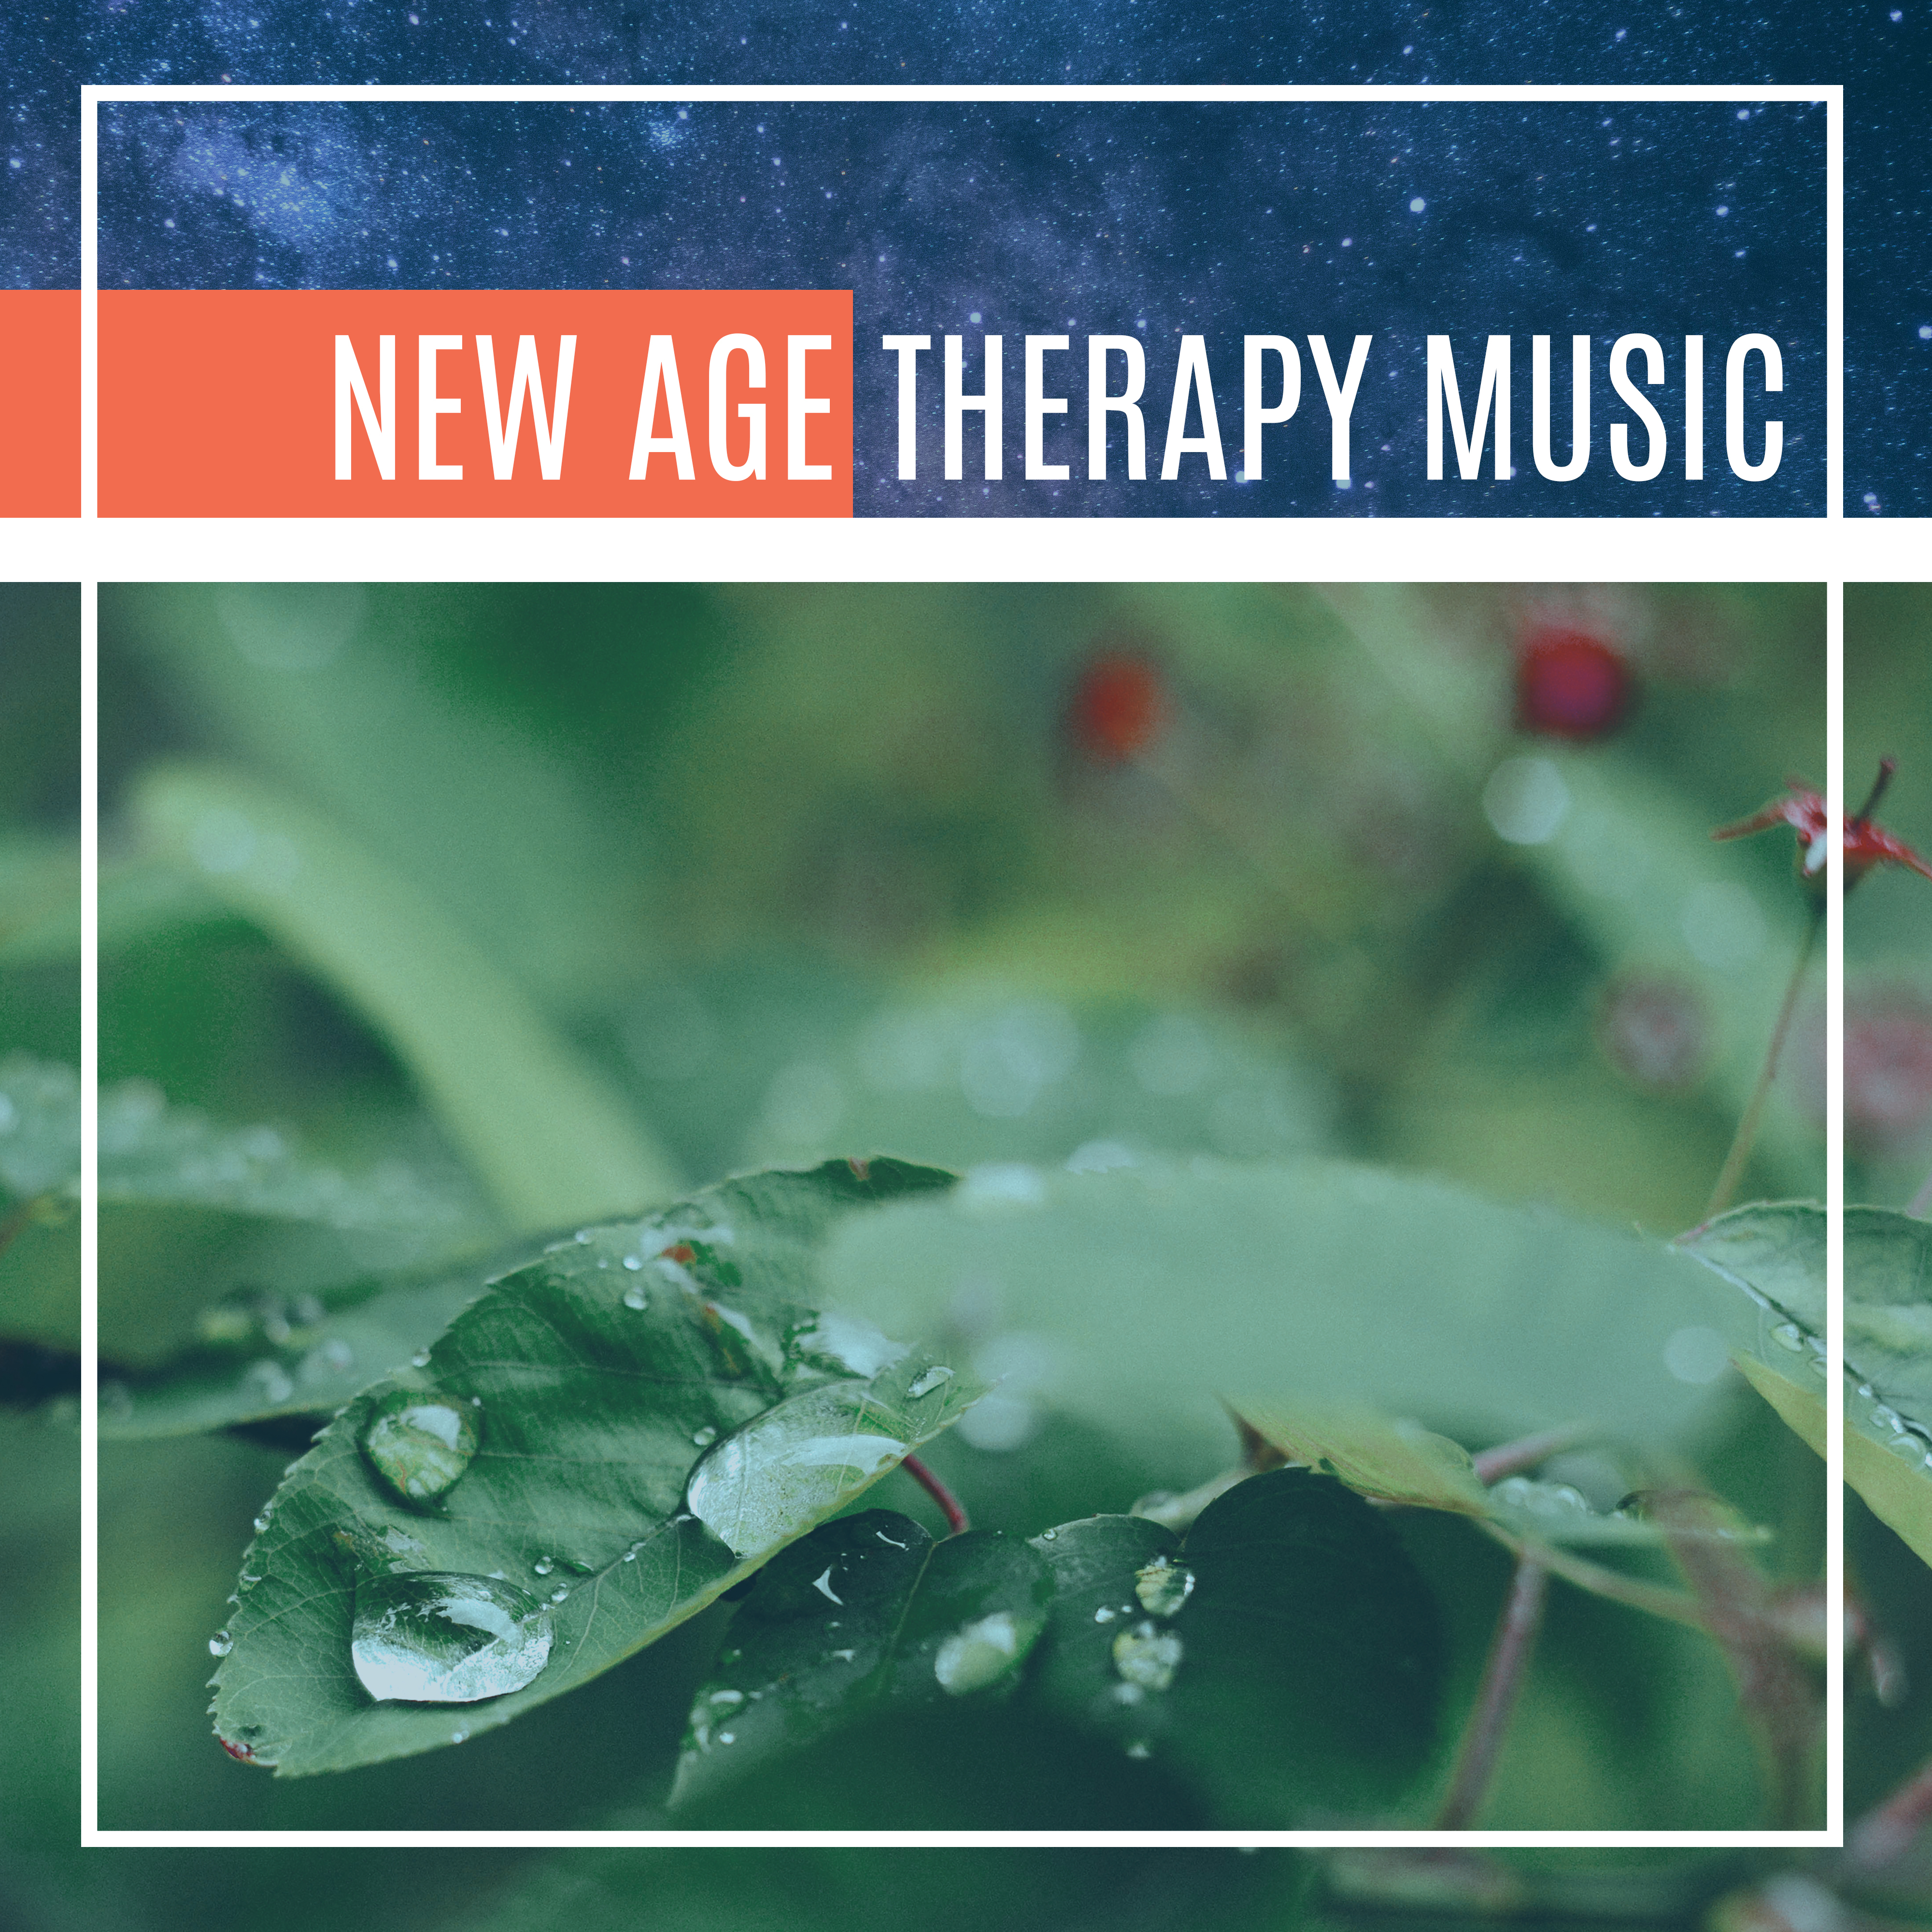 New Age Therapy Music – Calming Sounds of Nature, Helpful for Relaxation, Feel Better, Relaxing Music